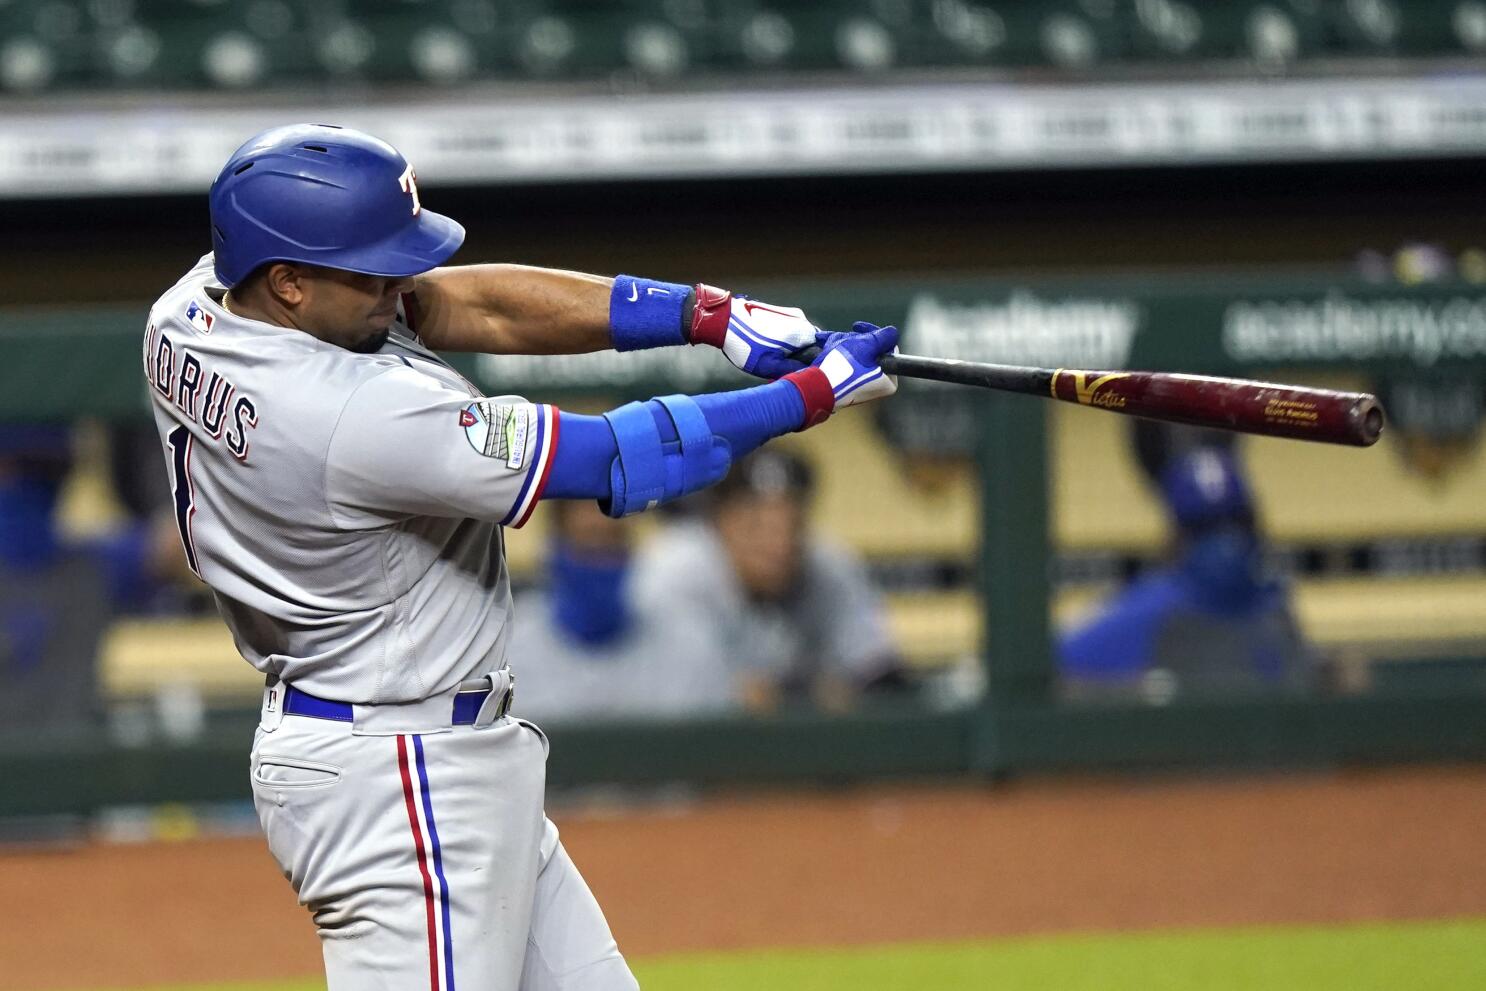 Shortstop Elvis Andrus has ascended to leader in Texas